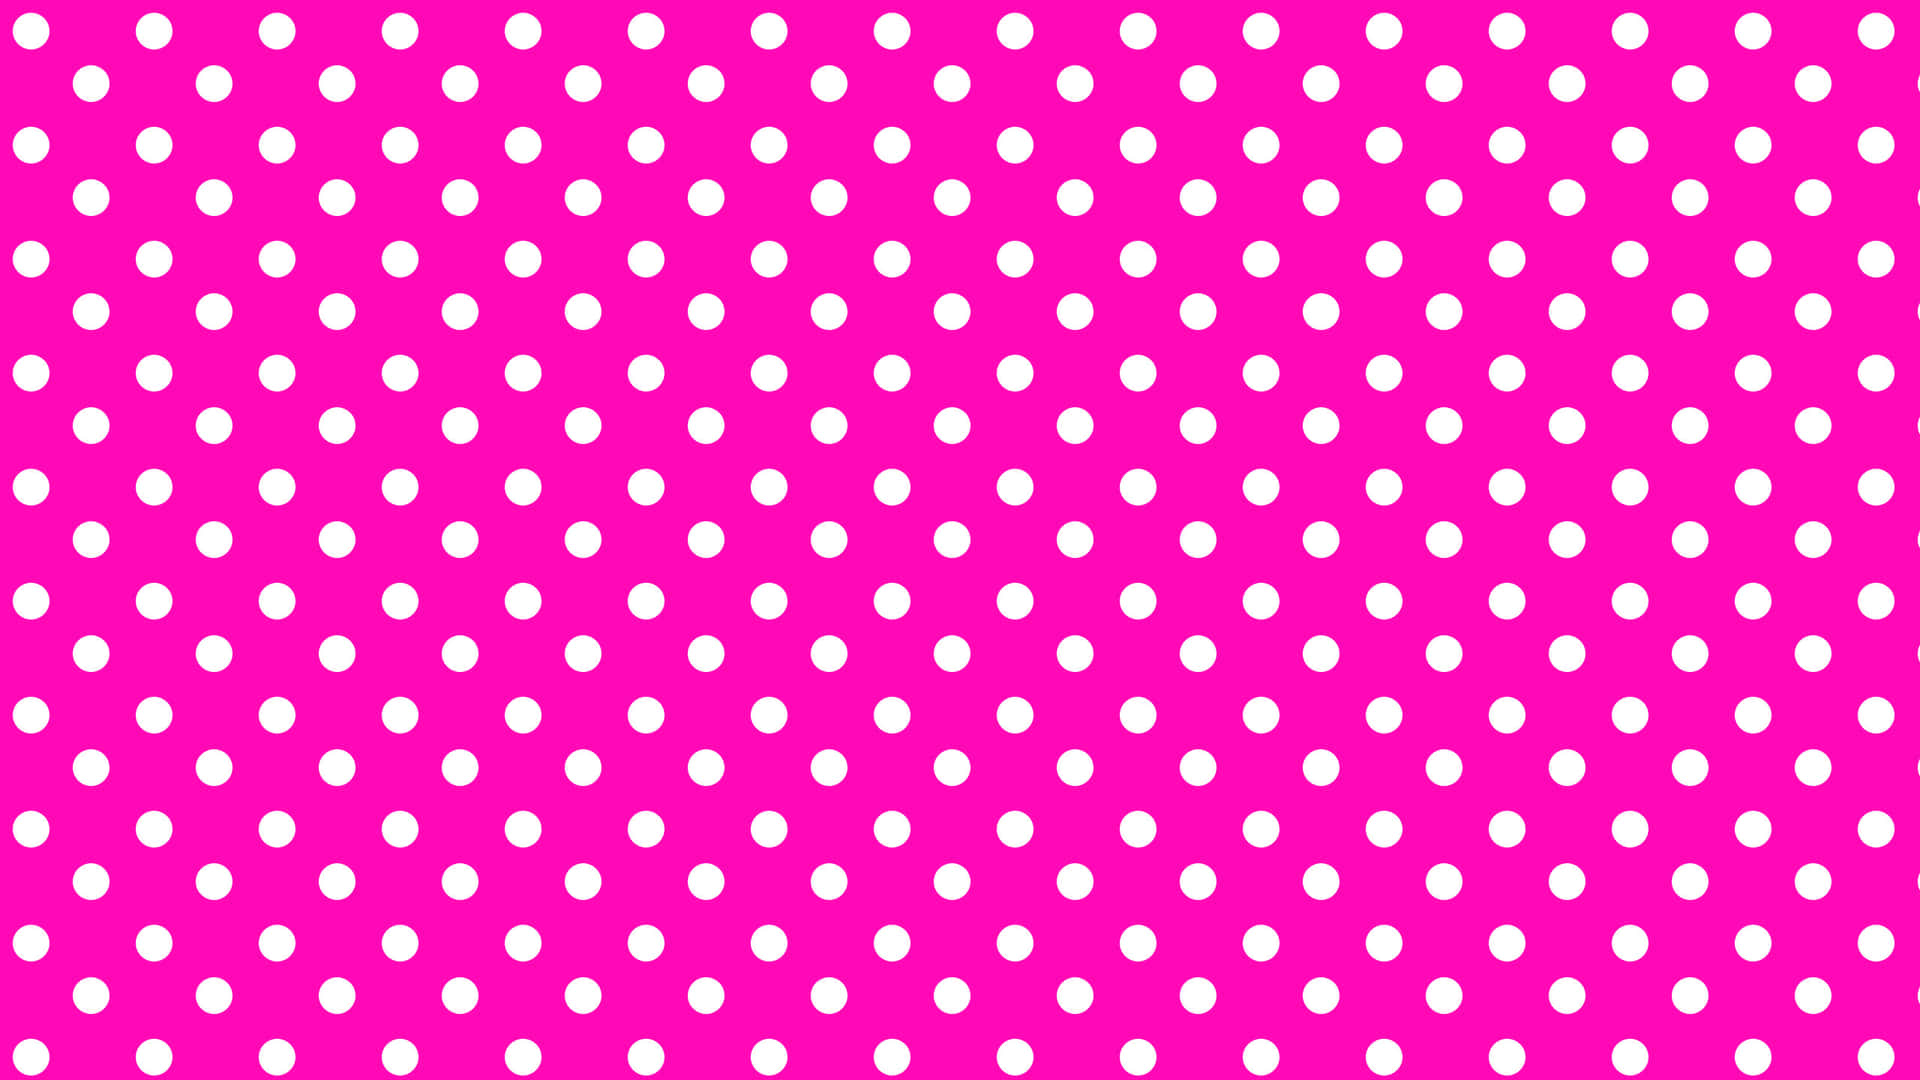 10. Pink and White French Nails with Polka Dots - wide 5